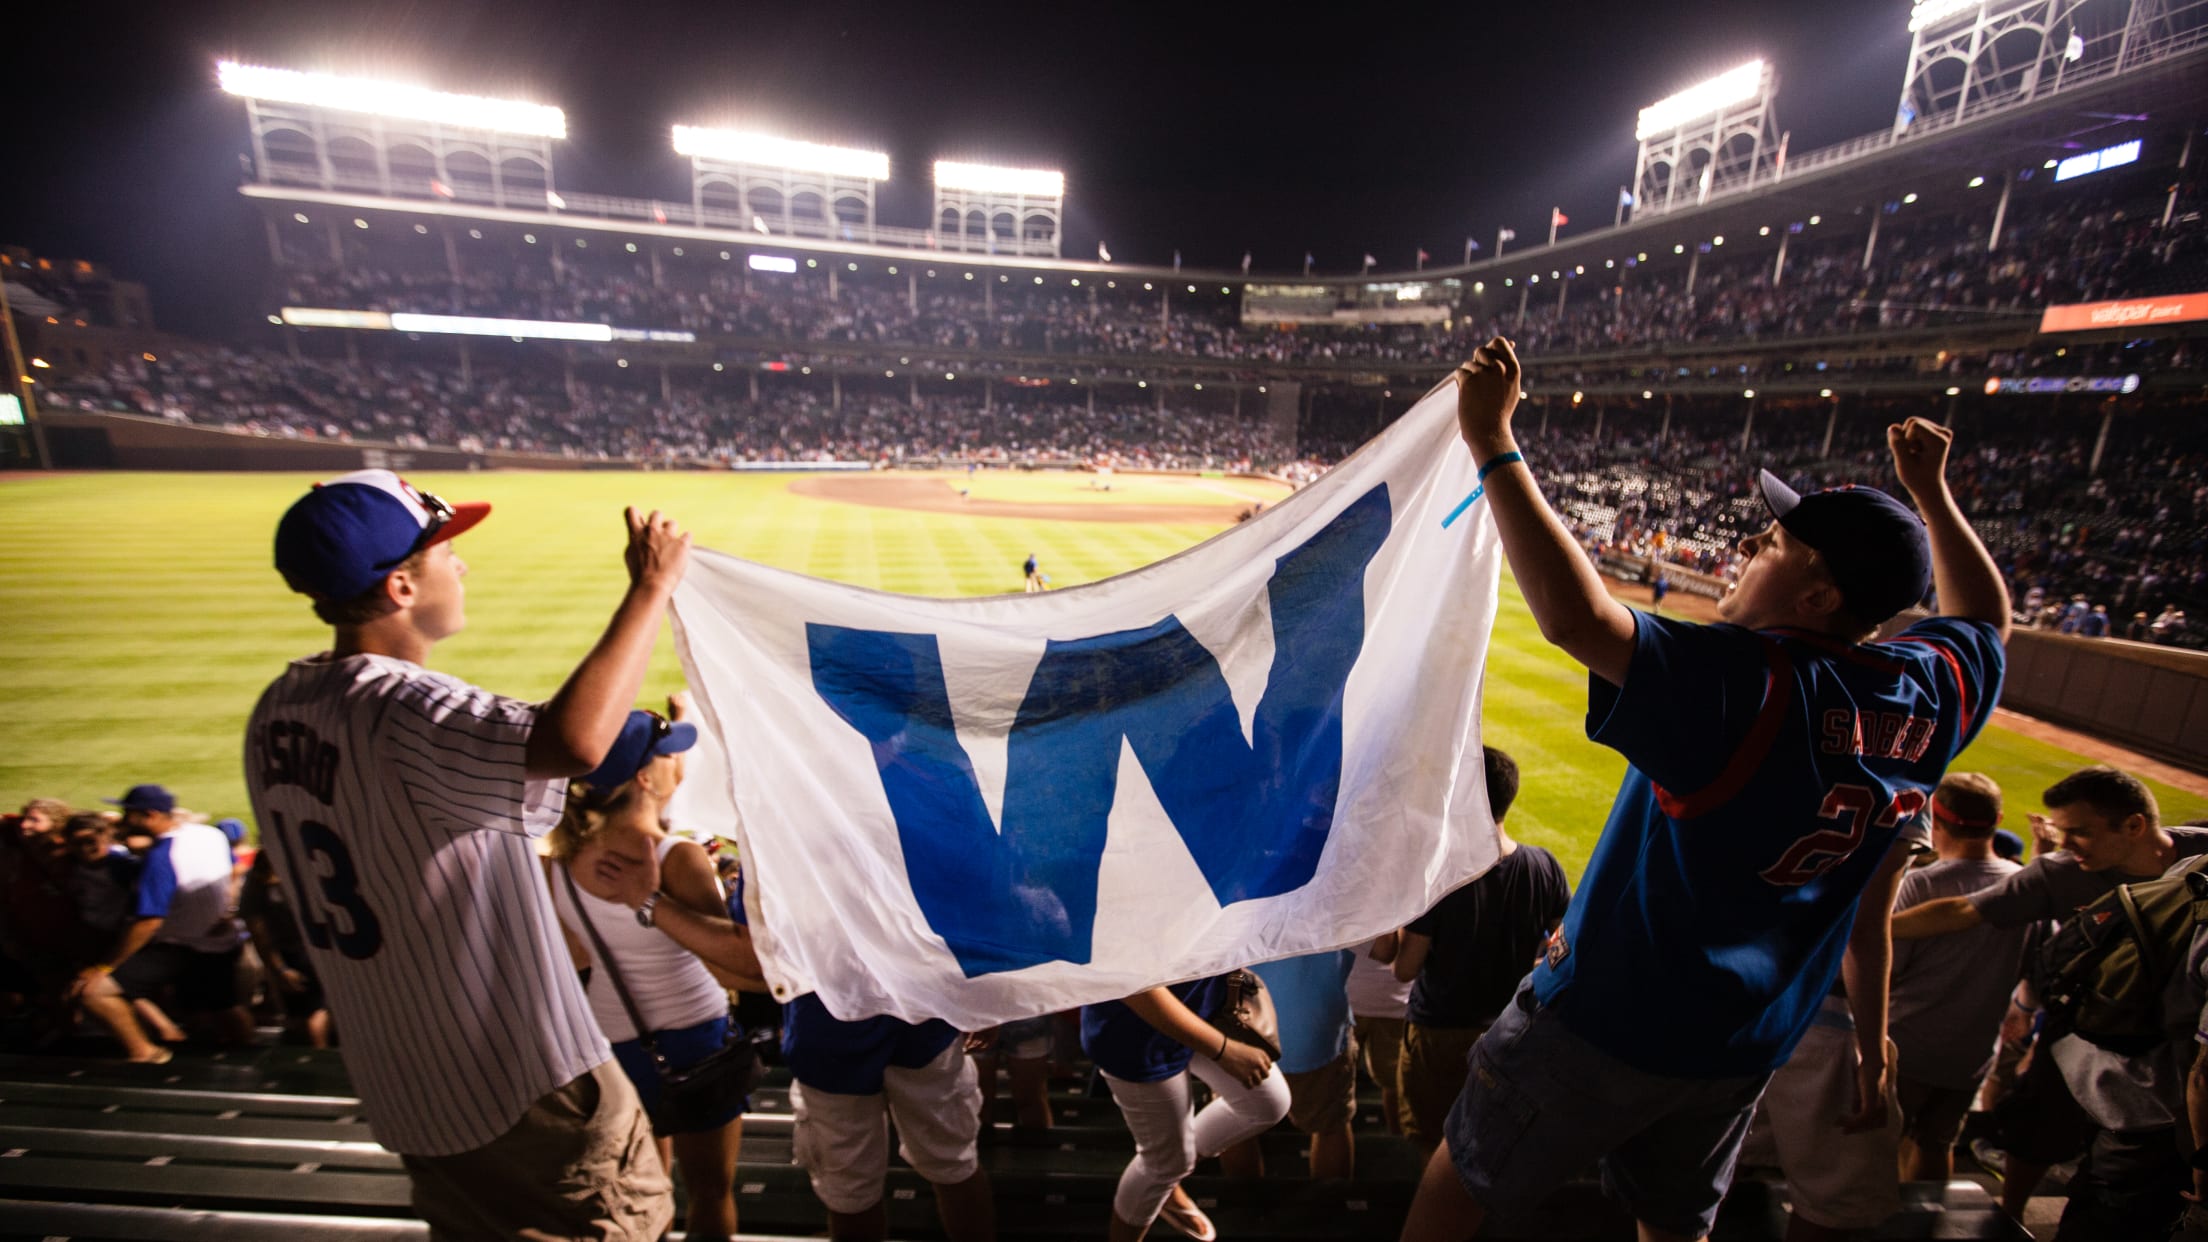 Chicago Cubs: Real-time gamification and personalization for fans at Wrigley  Field